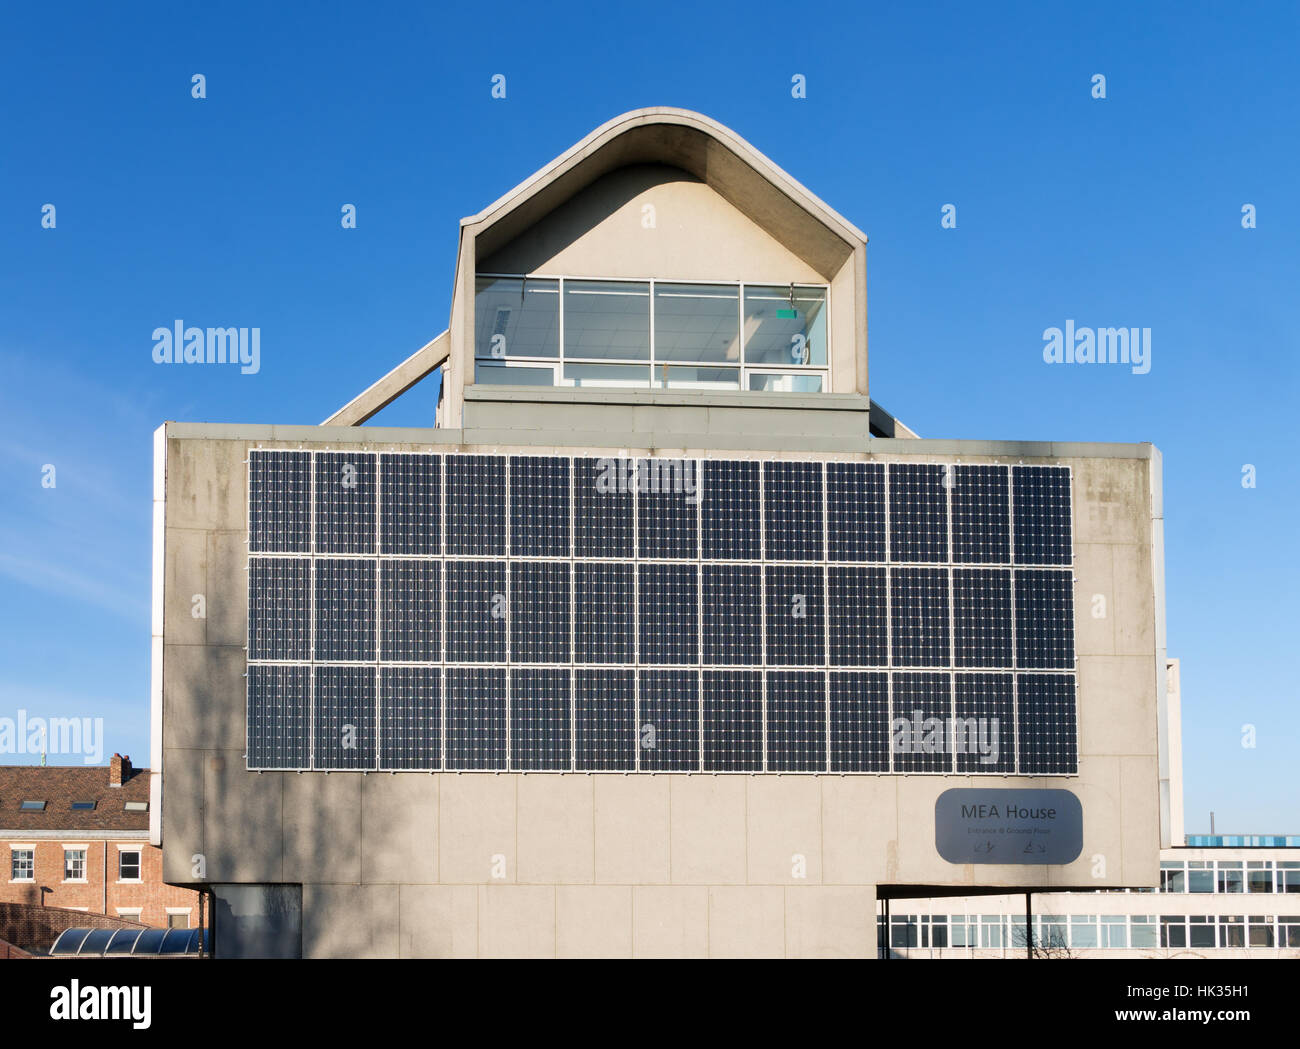 Solar panels on MEA house a listed 1970s building in Newcastle upon Tyne, England, UK Stock Photo